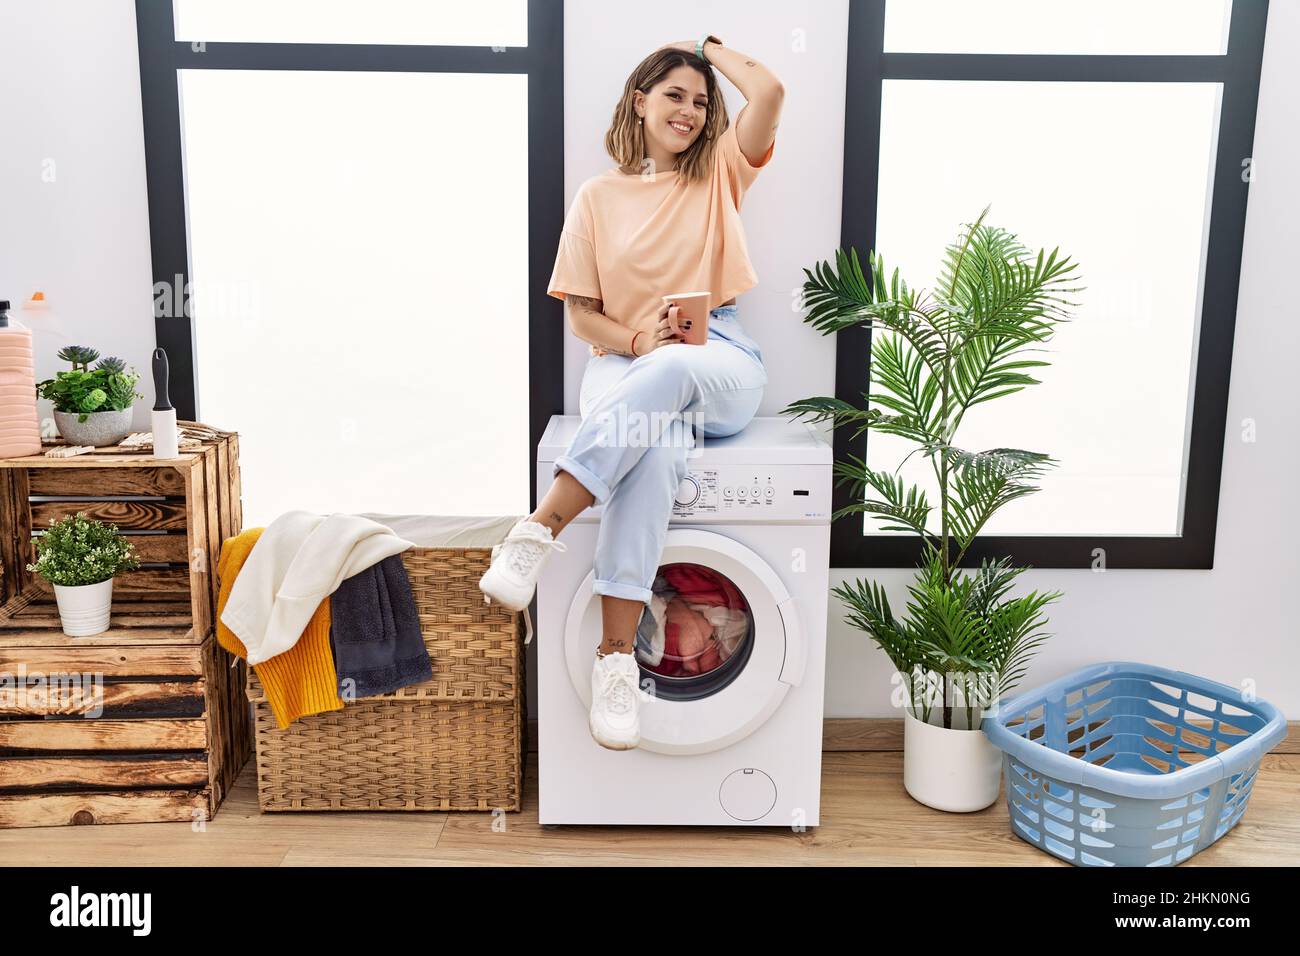 Young hispanic woman drinking coffee waiting for washing machine at laundry room smiling confident touching hair with hand up gesture, posing attracti Stock Photo